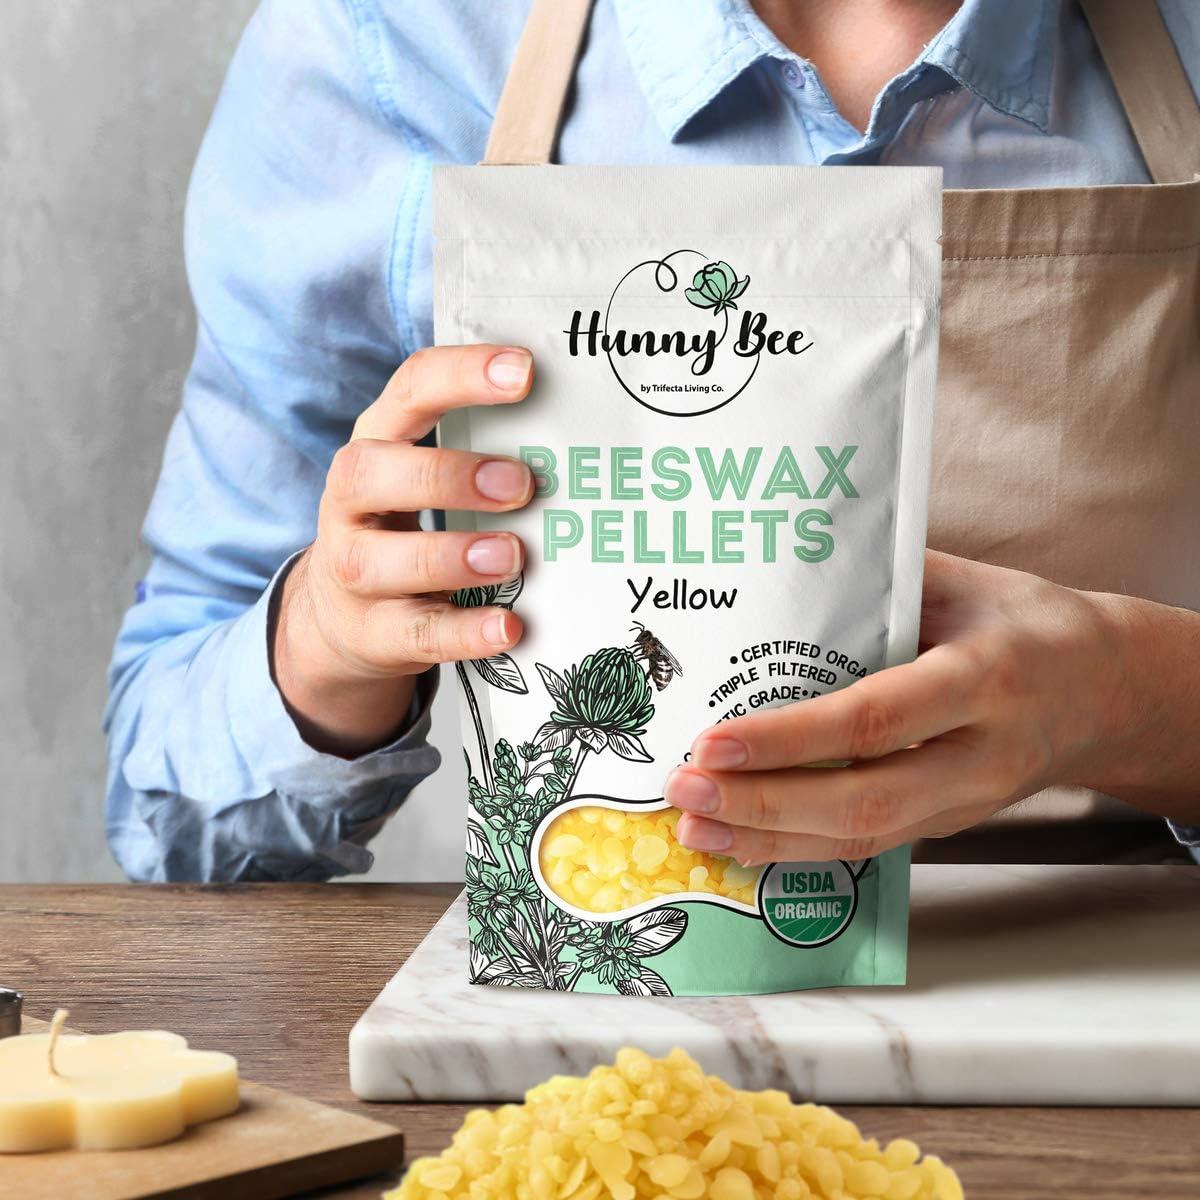 Yellow & White Beeswax Pastilles : 1 lb | Betterbee